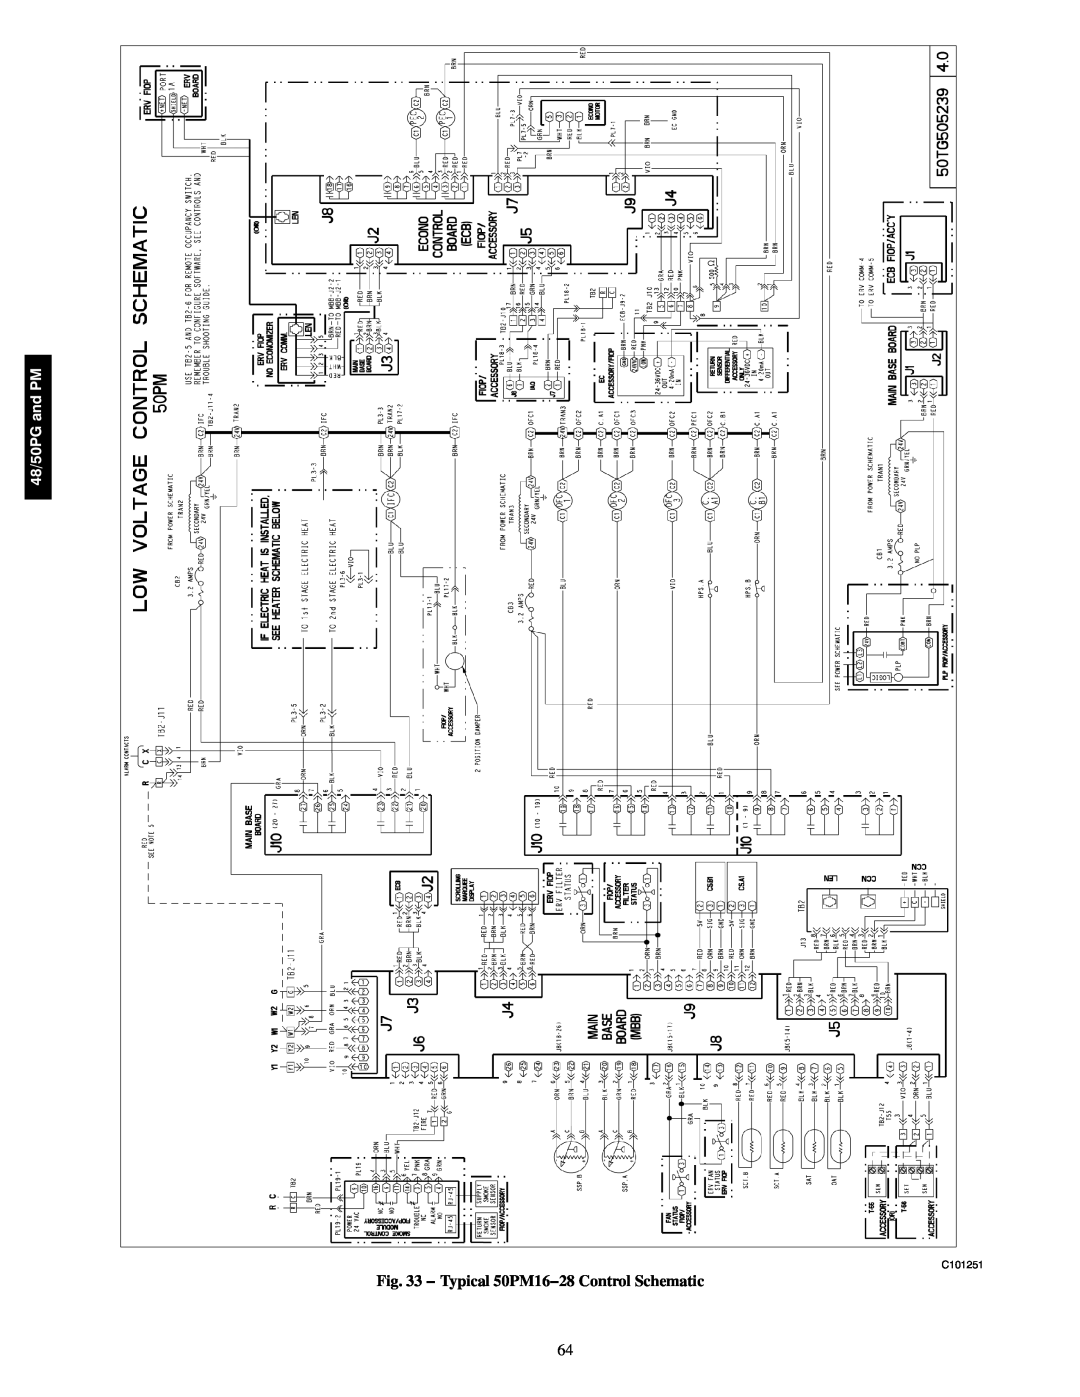 Carrier 48/50PG C03-14, 48/50PM C16-28 manual Typical 50PM16−28 Control Schematic, 48/50PG and PM, C101251 